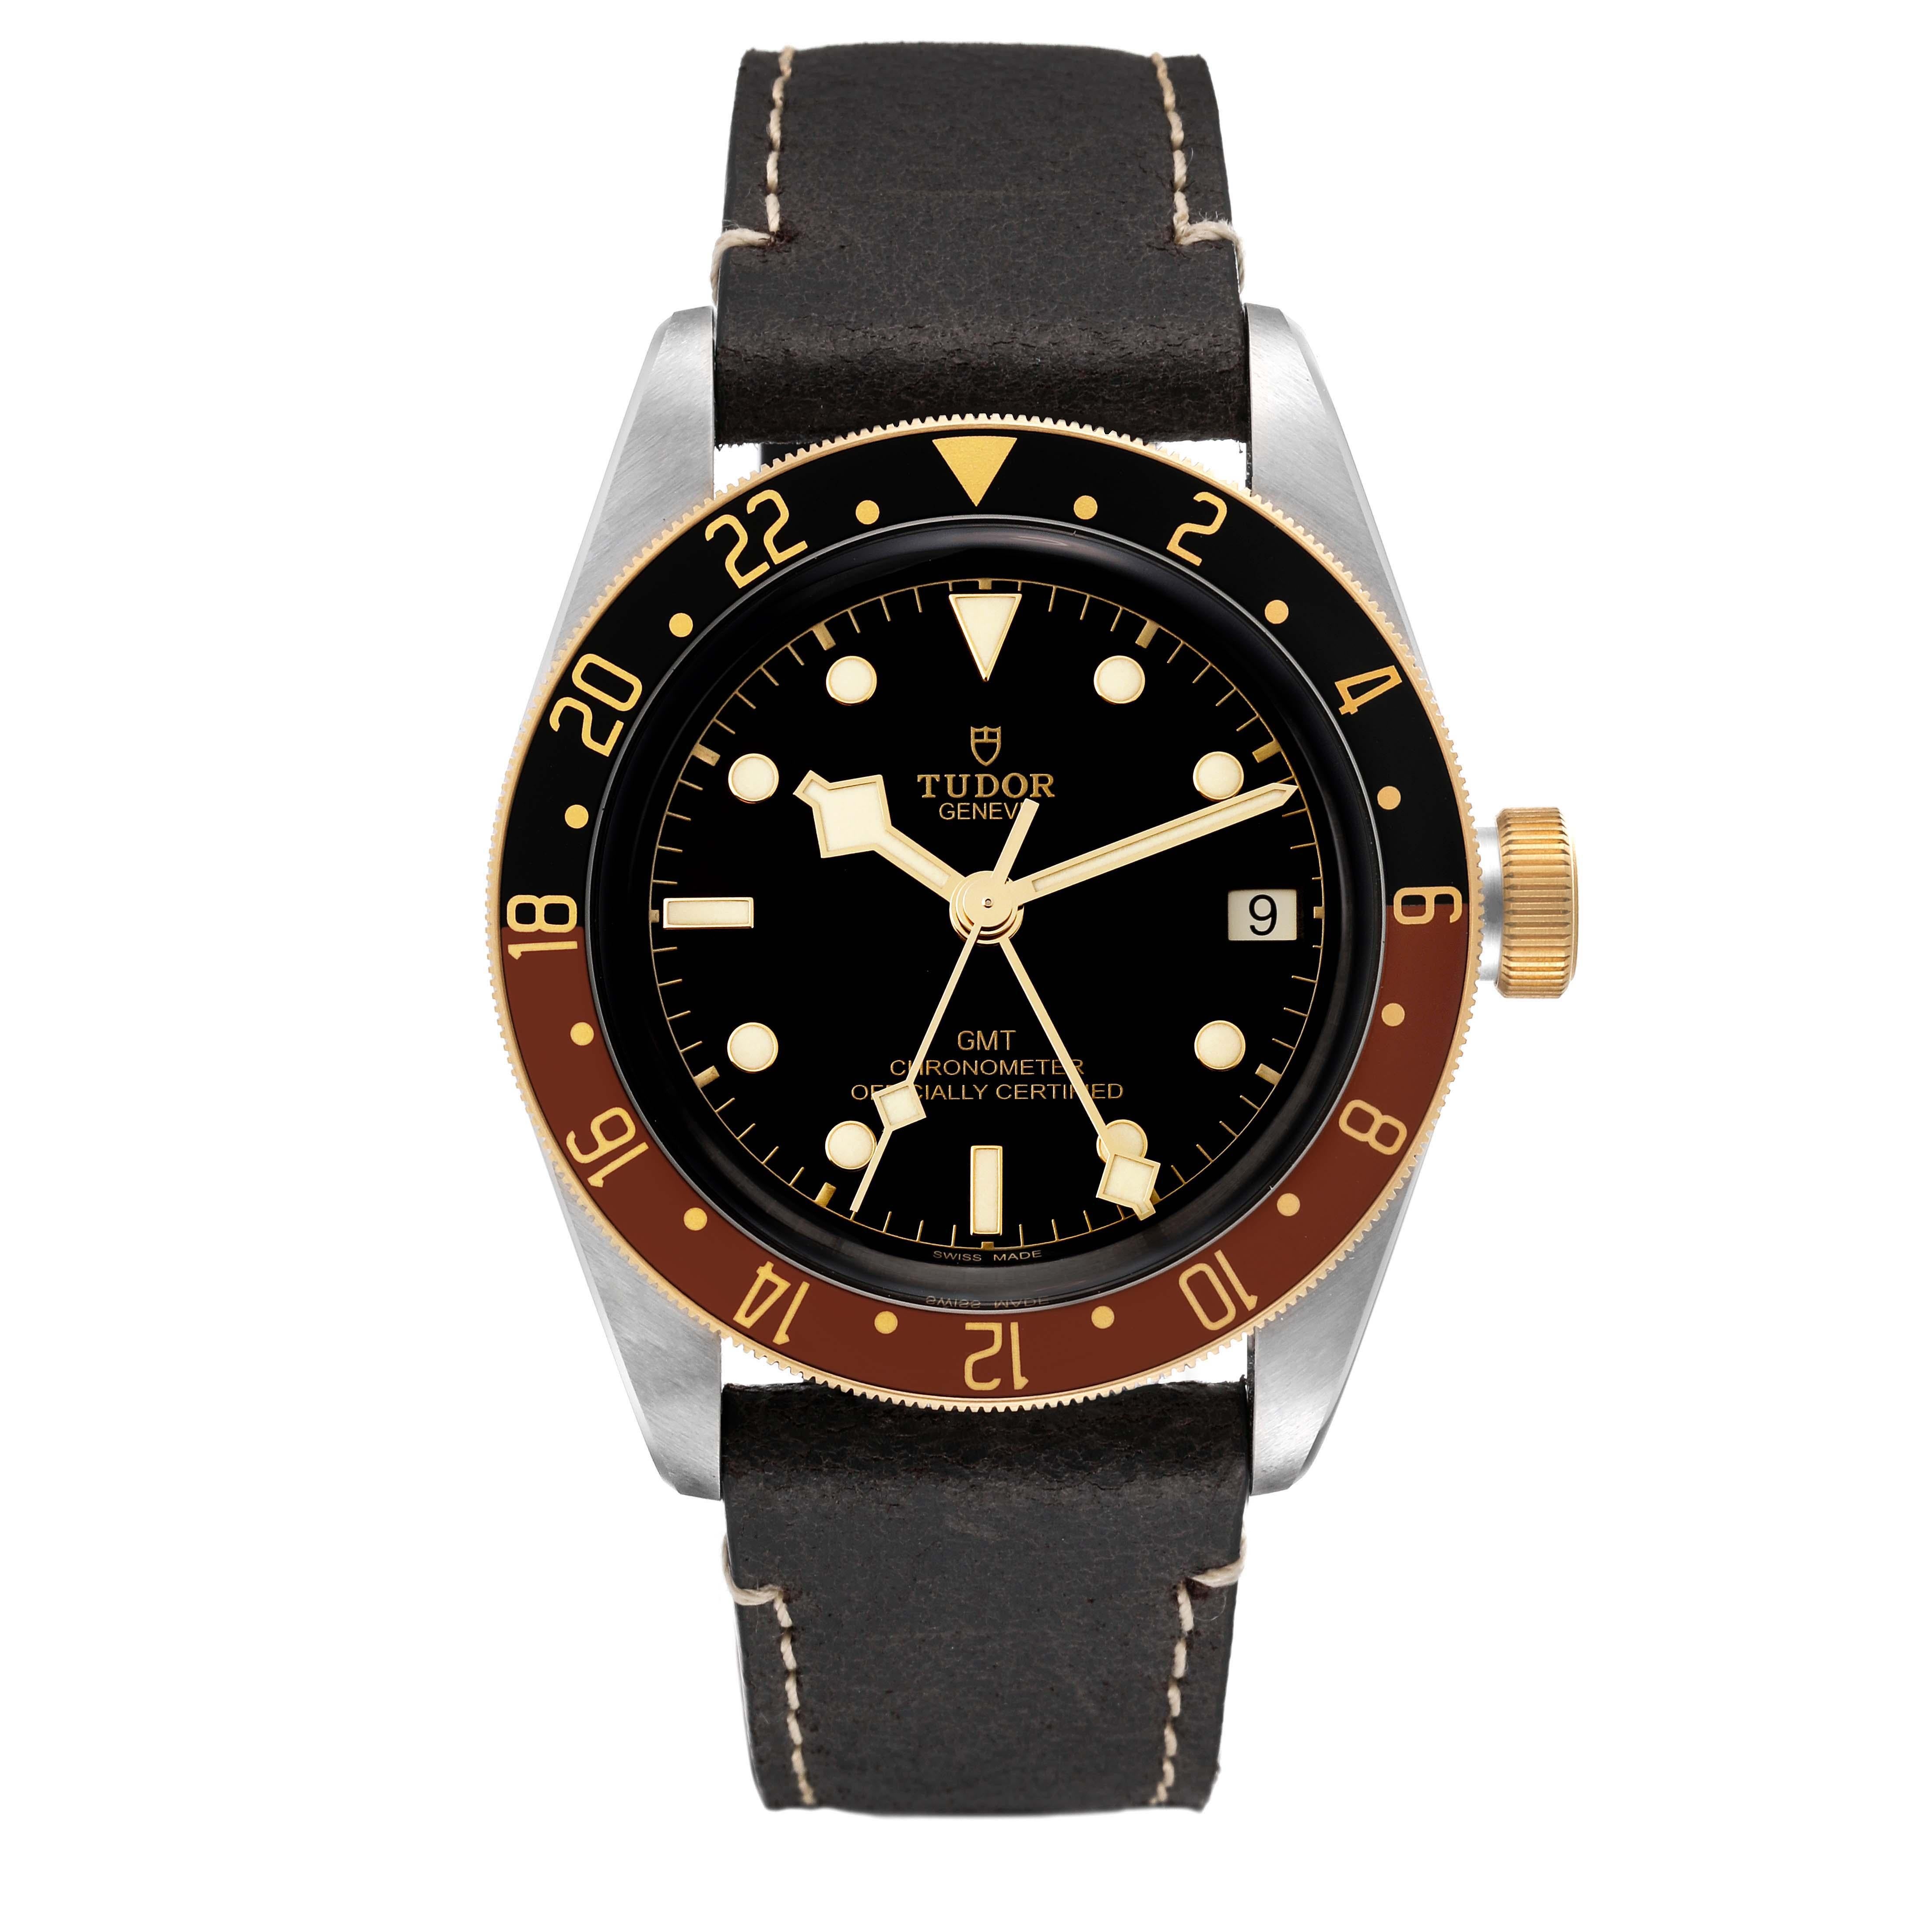 Tudor Heritage Black Bay GMT Steel Yellow Gold Mens Watch 79833MN Unworn. Automatic self-winding movement. Stainless steel oyster case 41.0 mm in diameter. Tudor logo on a crown. Bi-directional rotating black and brown (rootbeer) bezel. Scratch